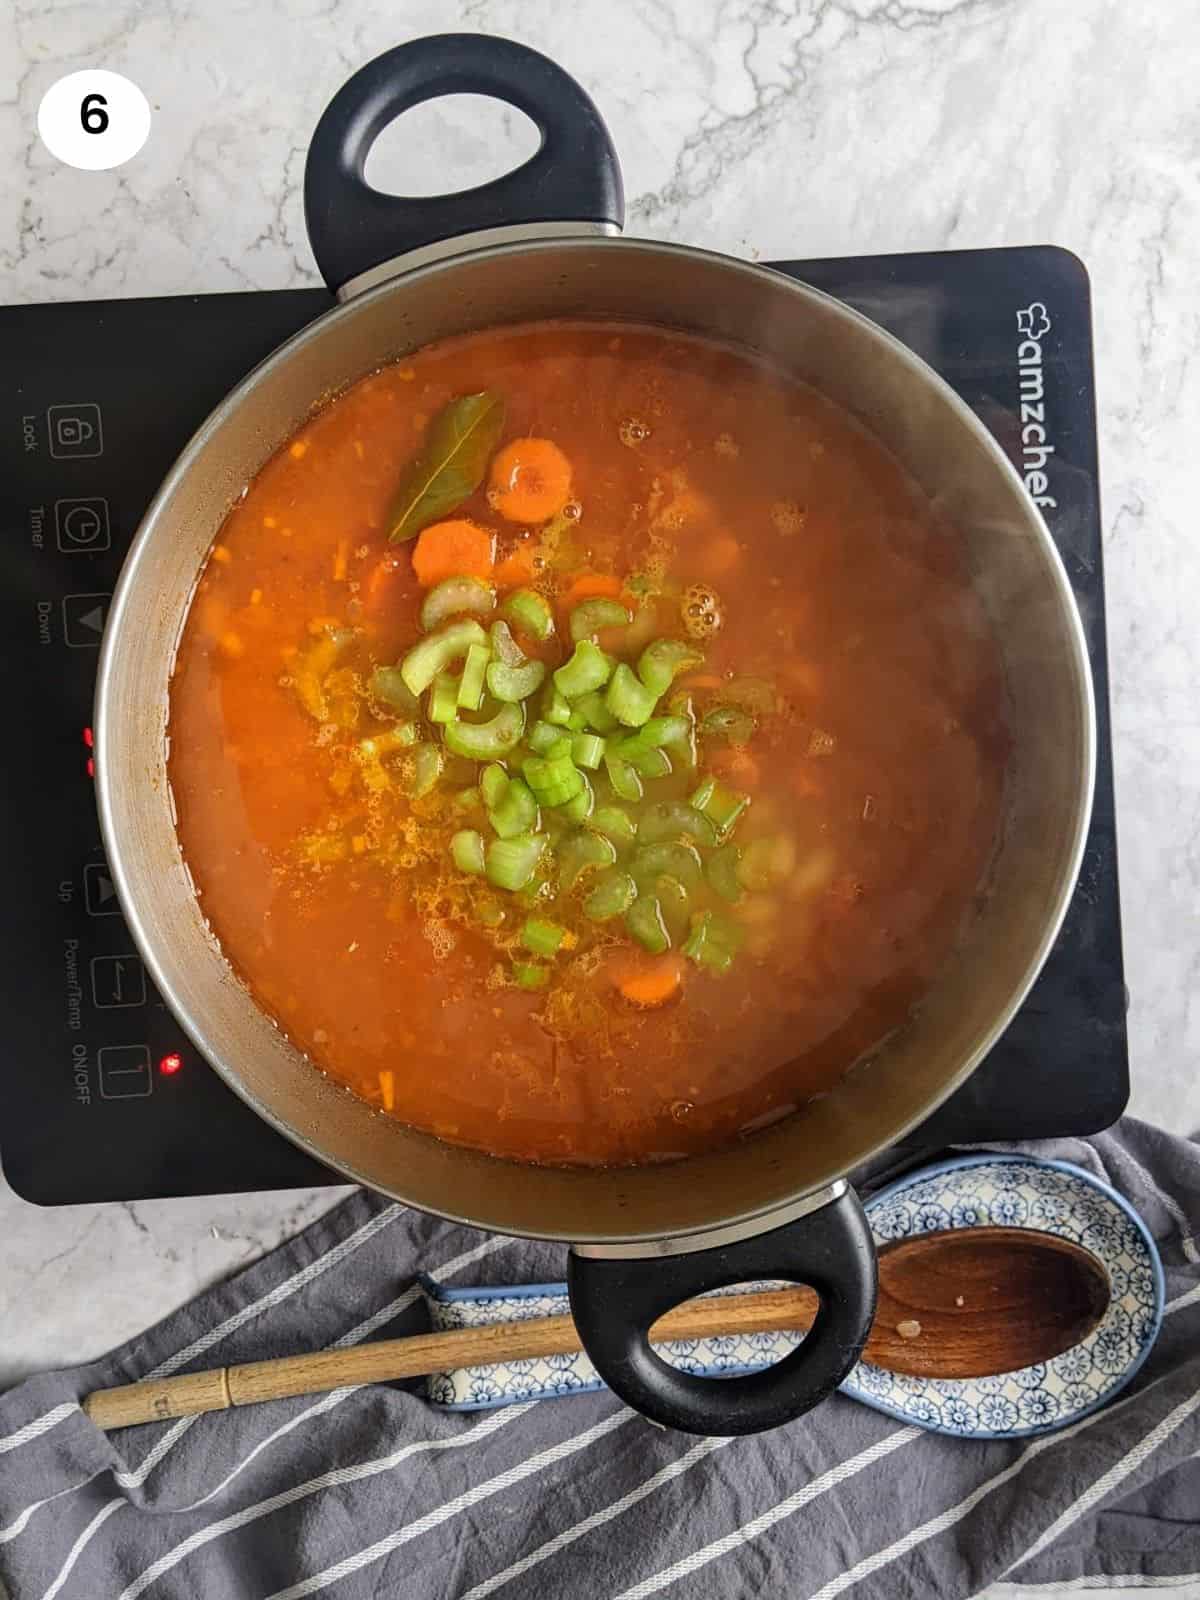 Adding carrots and celery to the pot.